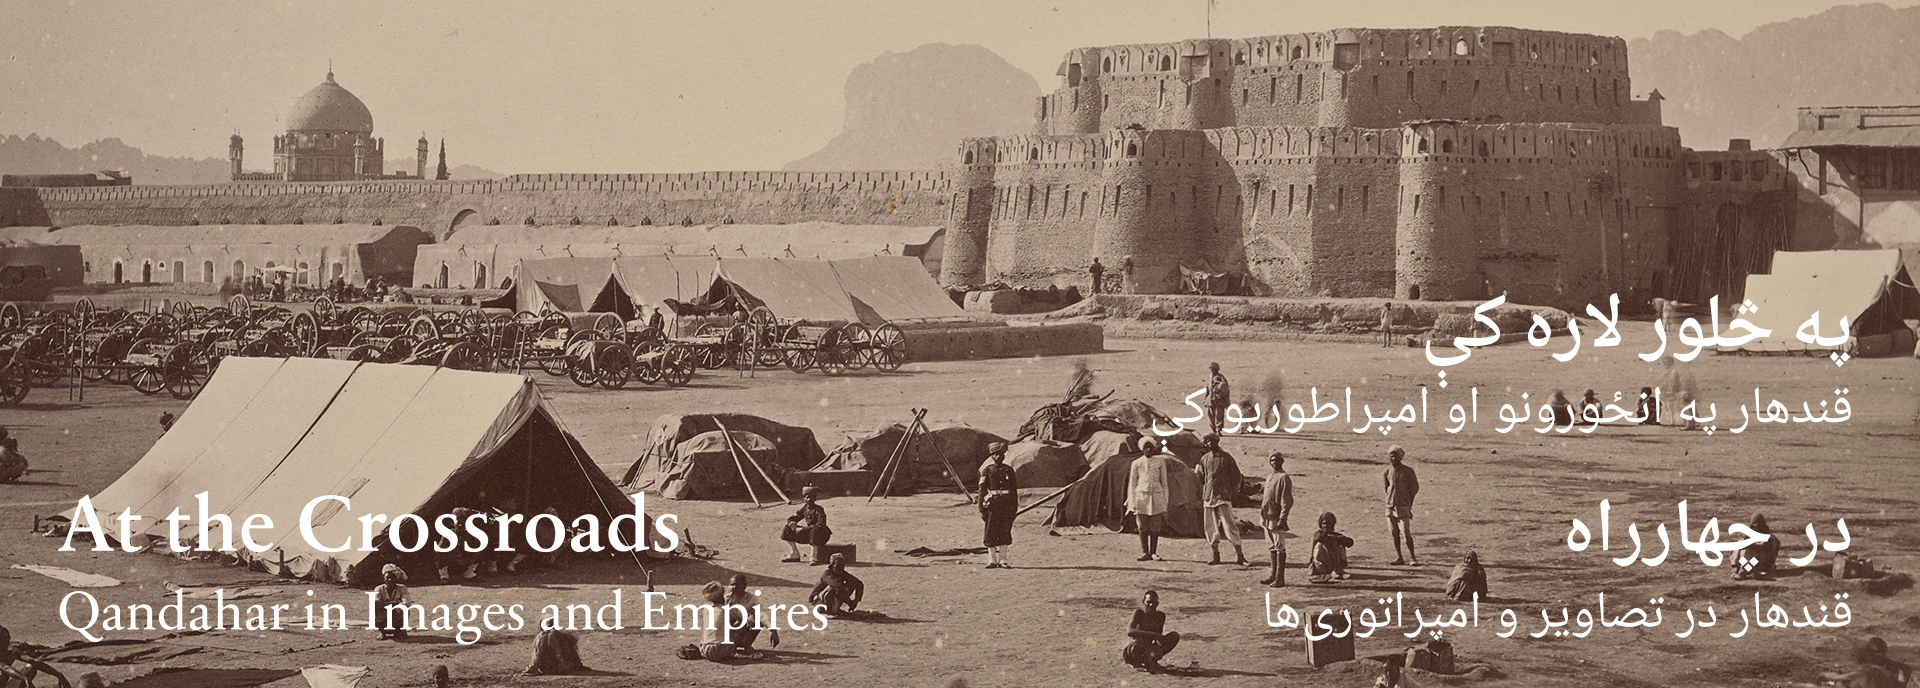 A sepia photograph shows tents and soldiers sitting in a field in the foreground with a stone citadel in the background.